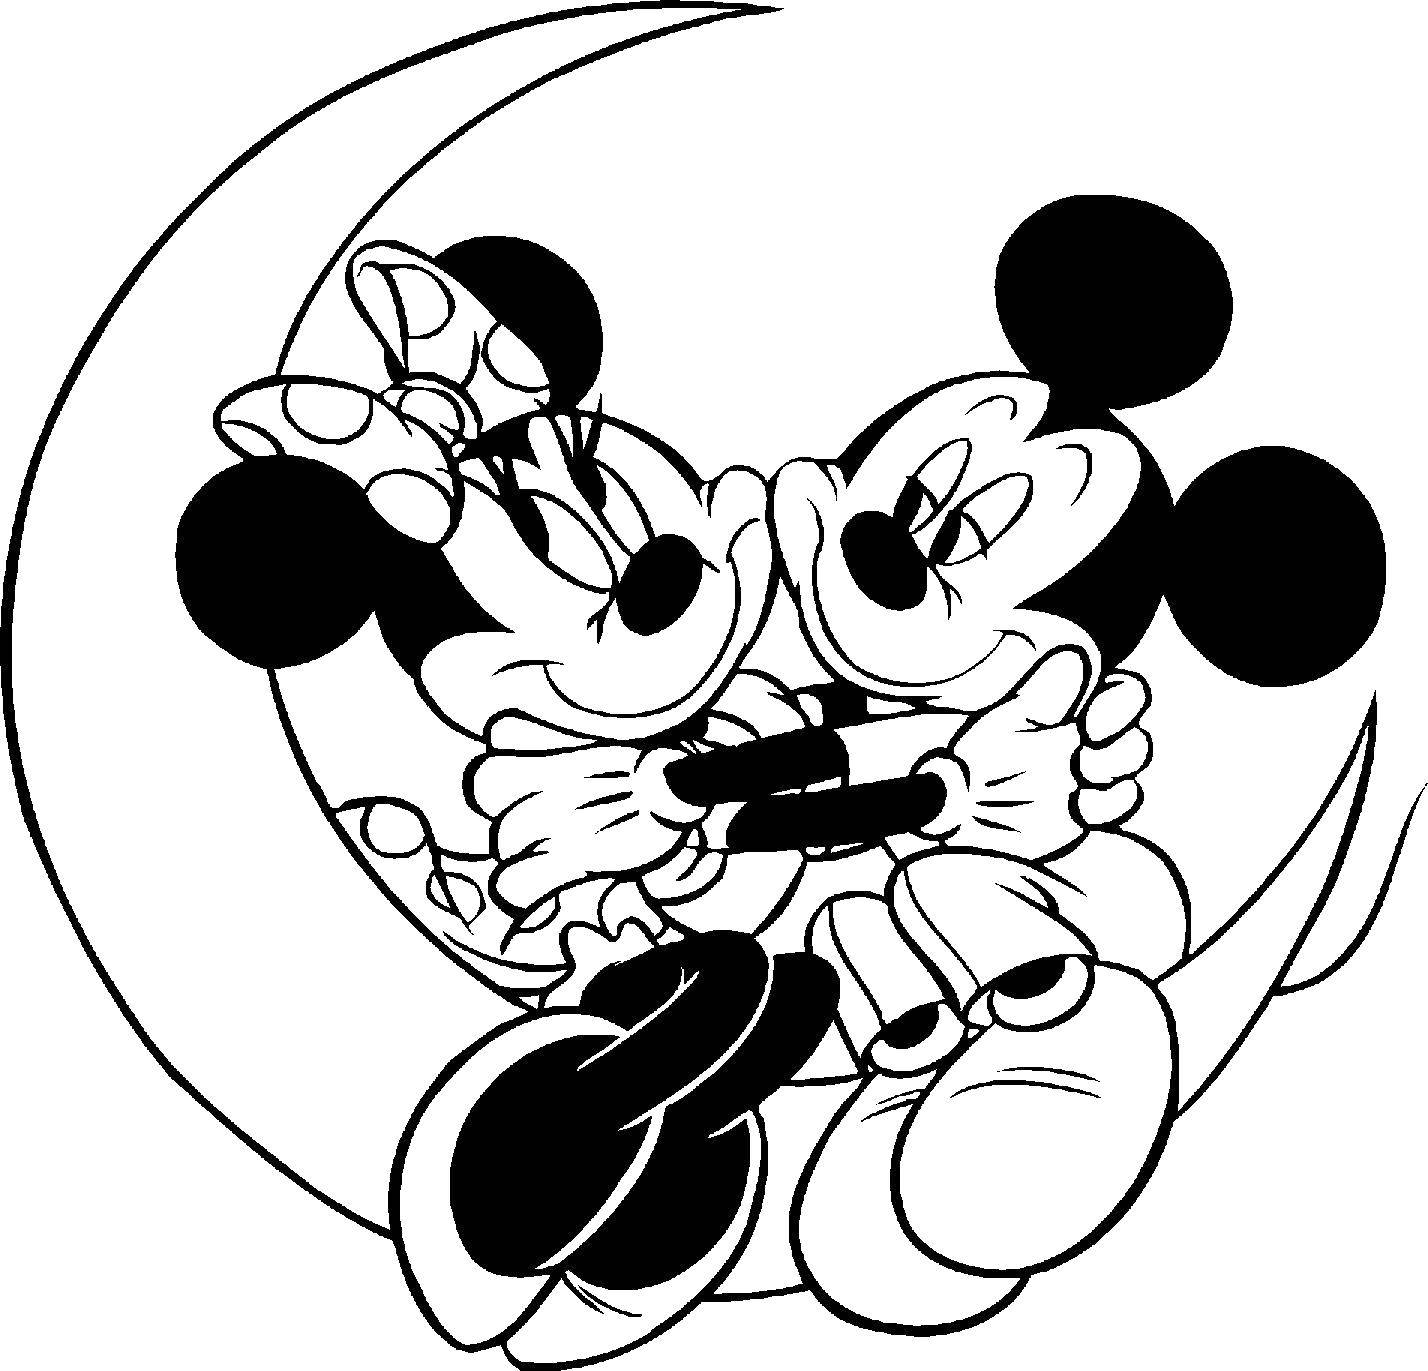 Coloring Mickey and mini mouse on the Crescent. Category Mickey mouse. Tags:  Mickey mouse, Mini mouse, cartoons.